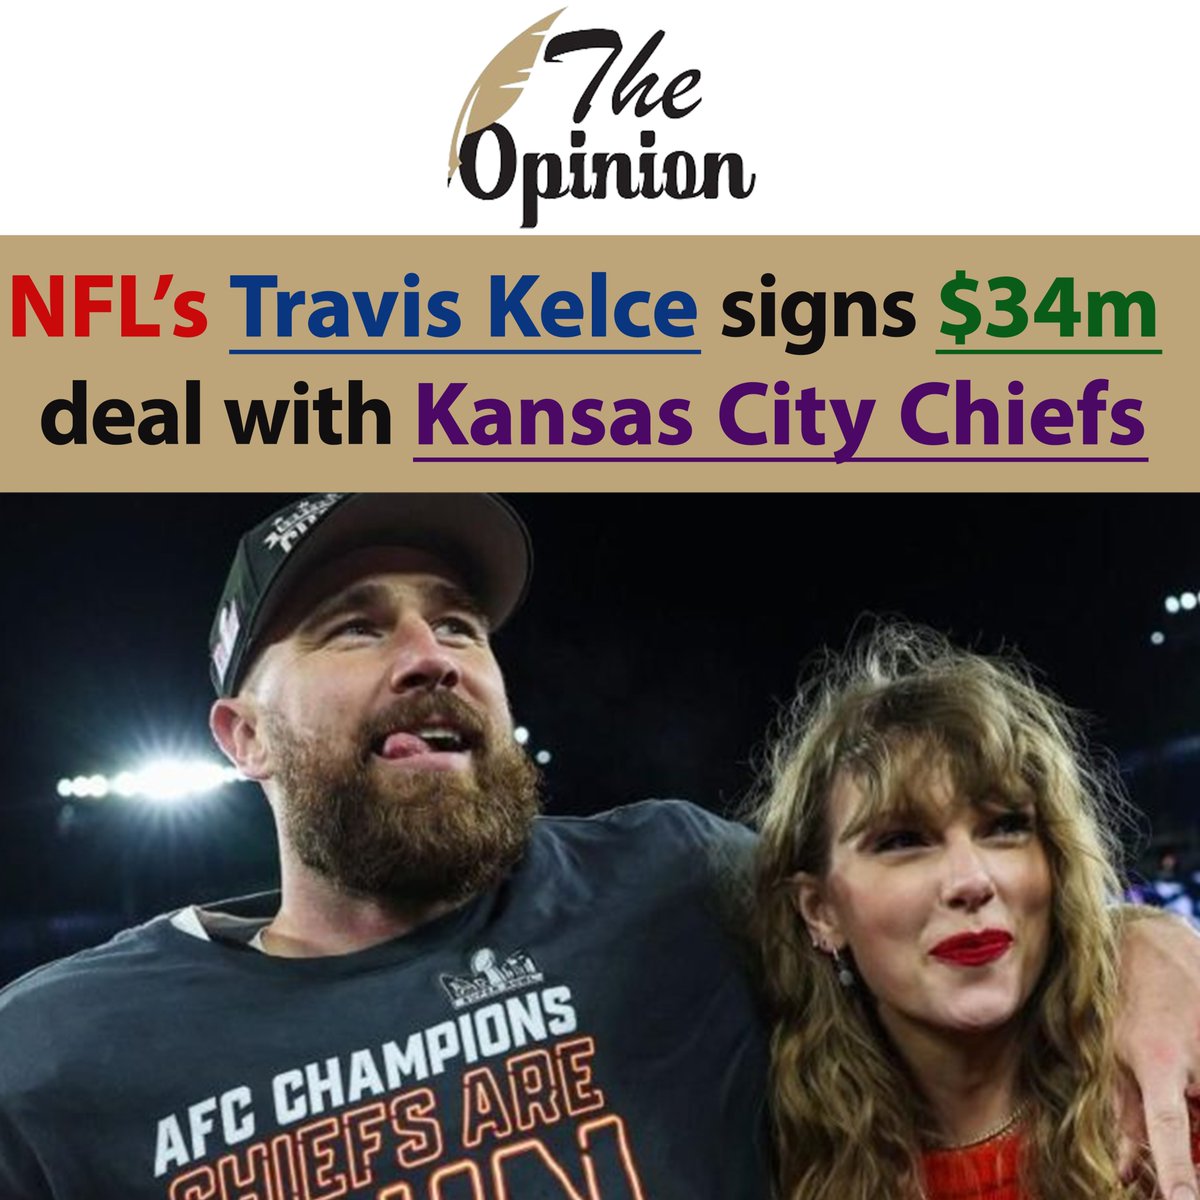 The tight end for the Kansas City Chiefs, Travis Kelce, has agreed to a two-year contract deal, as per local media reports. 

#NFL #TravisKelce #KansasCityChiefs #football 

Read Full Story: theopinion.com.pk/nfls-travis-ke…